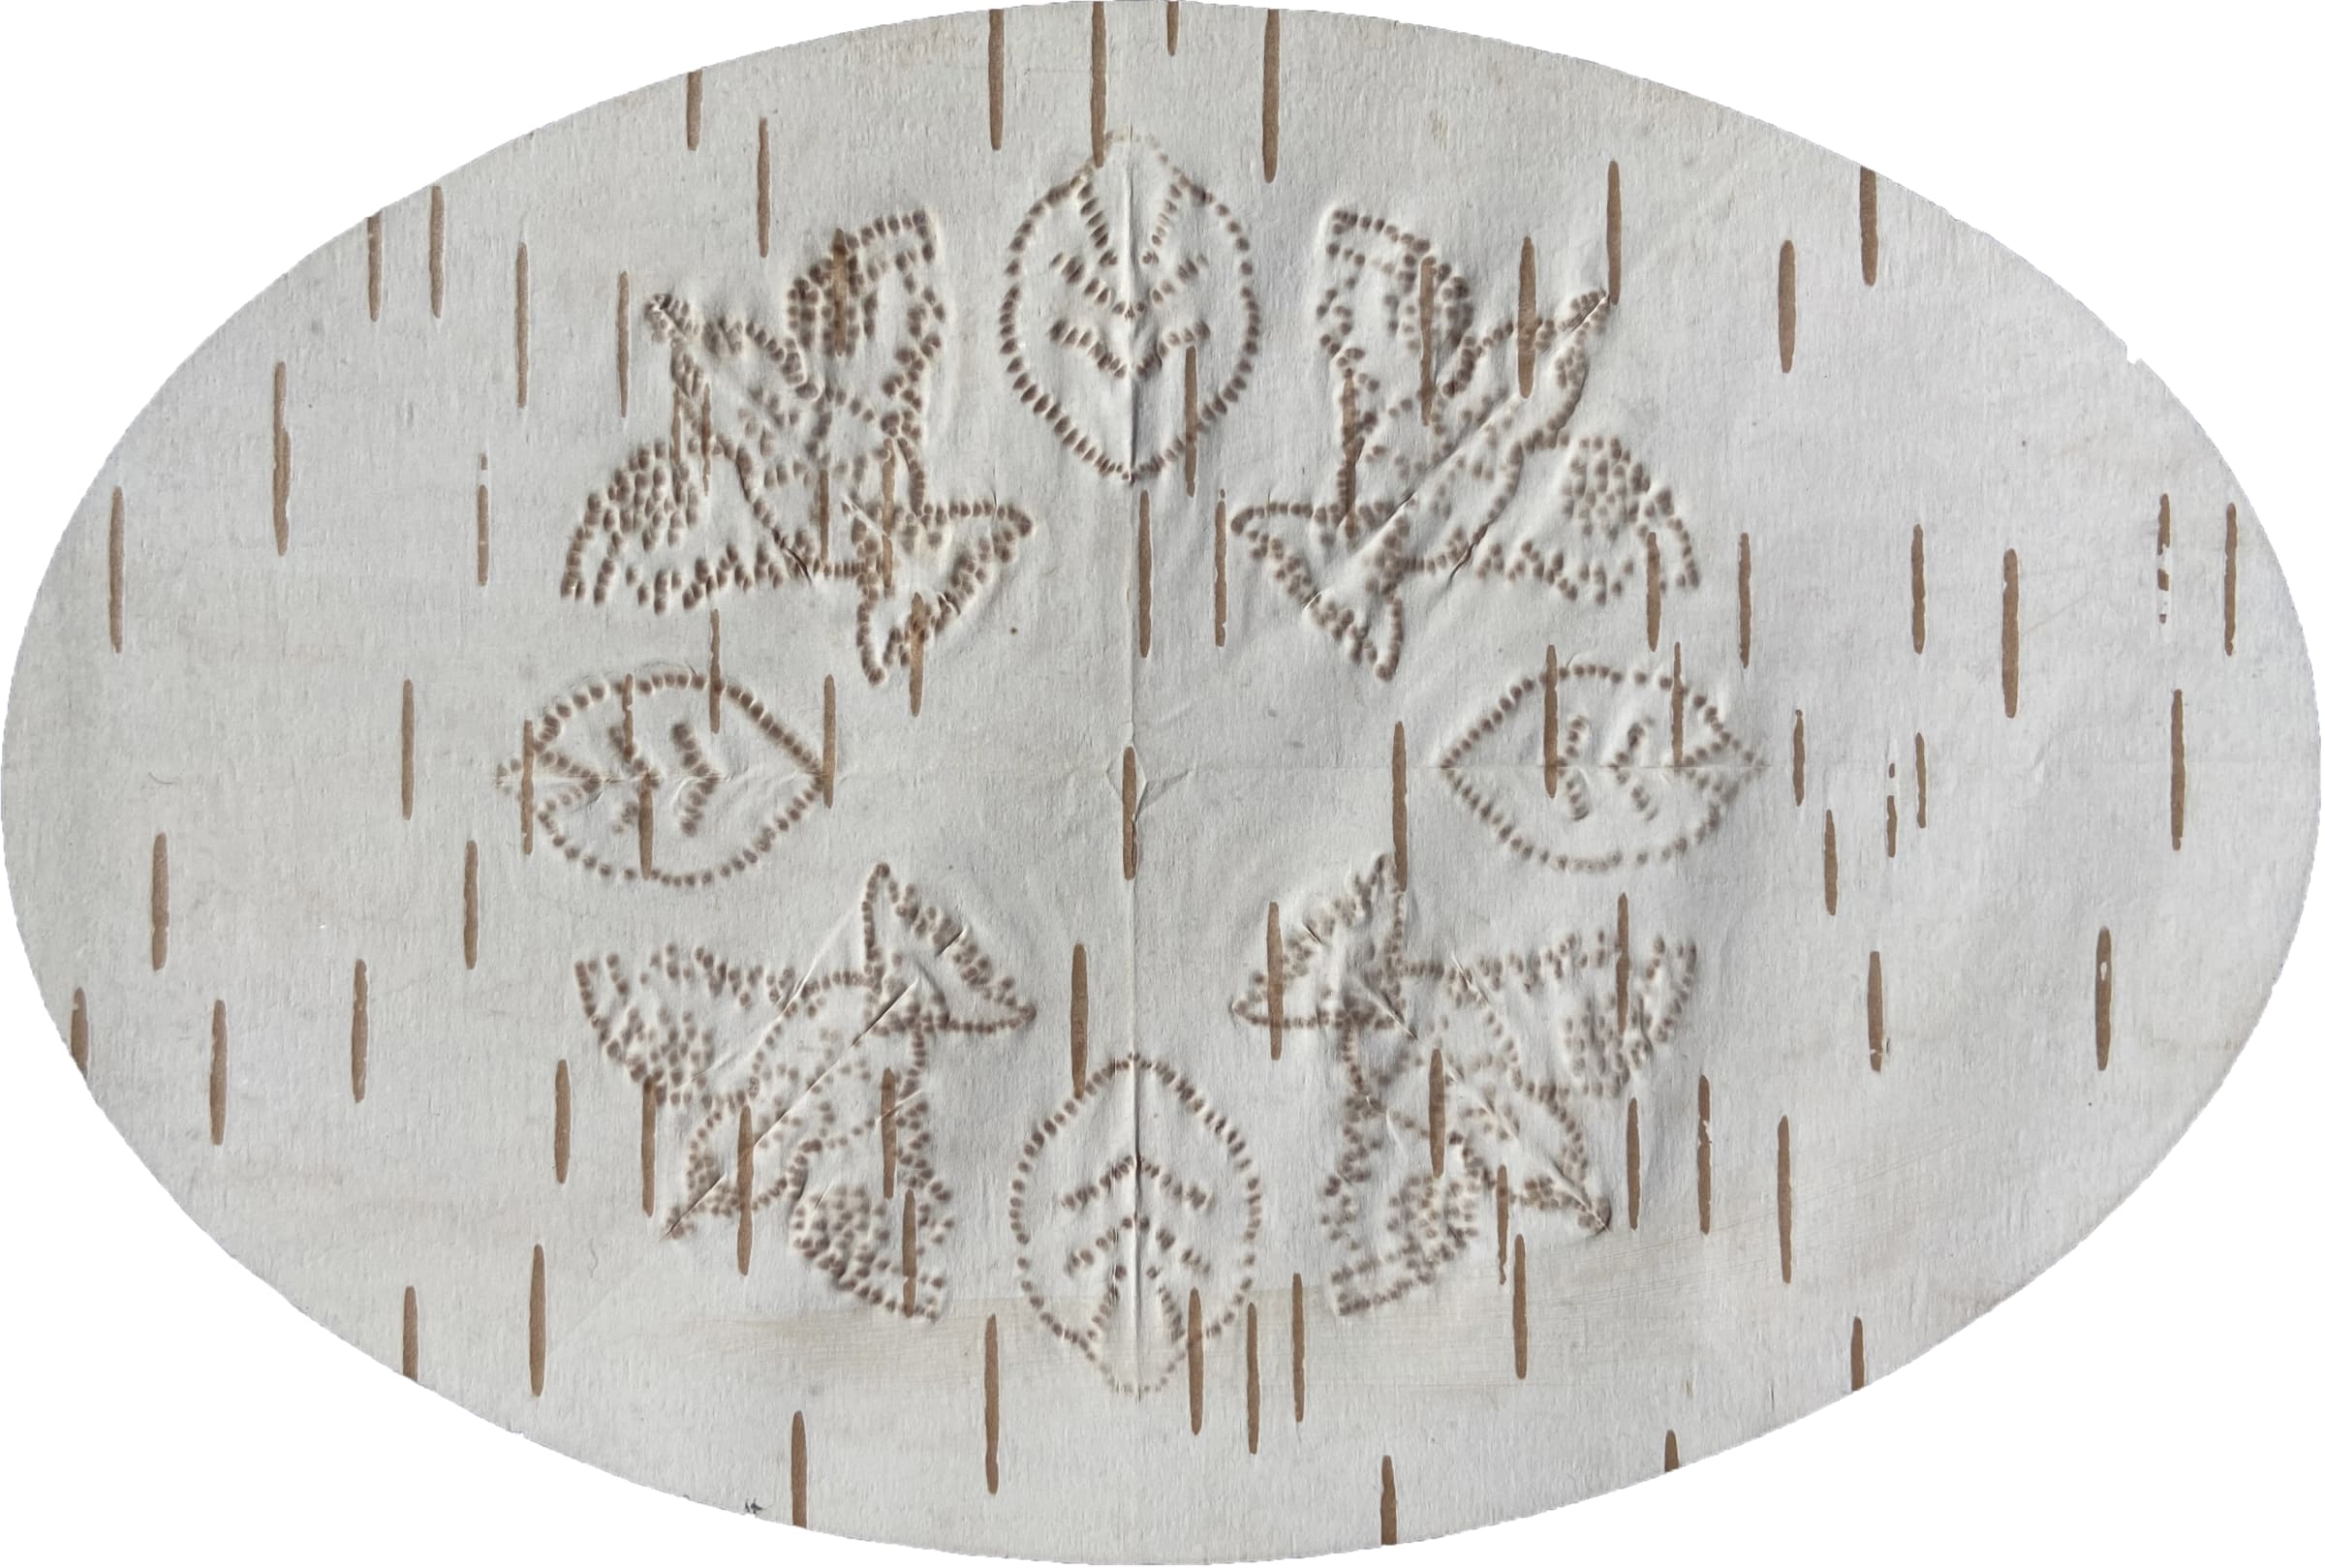 Birch bark biting merges traditional skill and contemporary art 